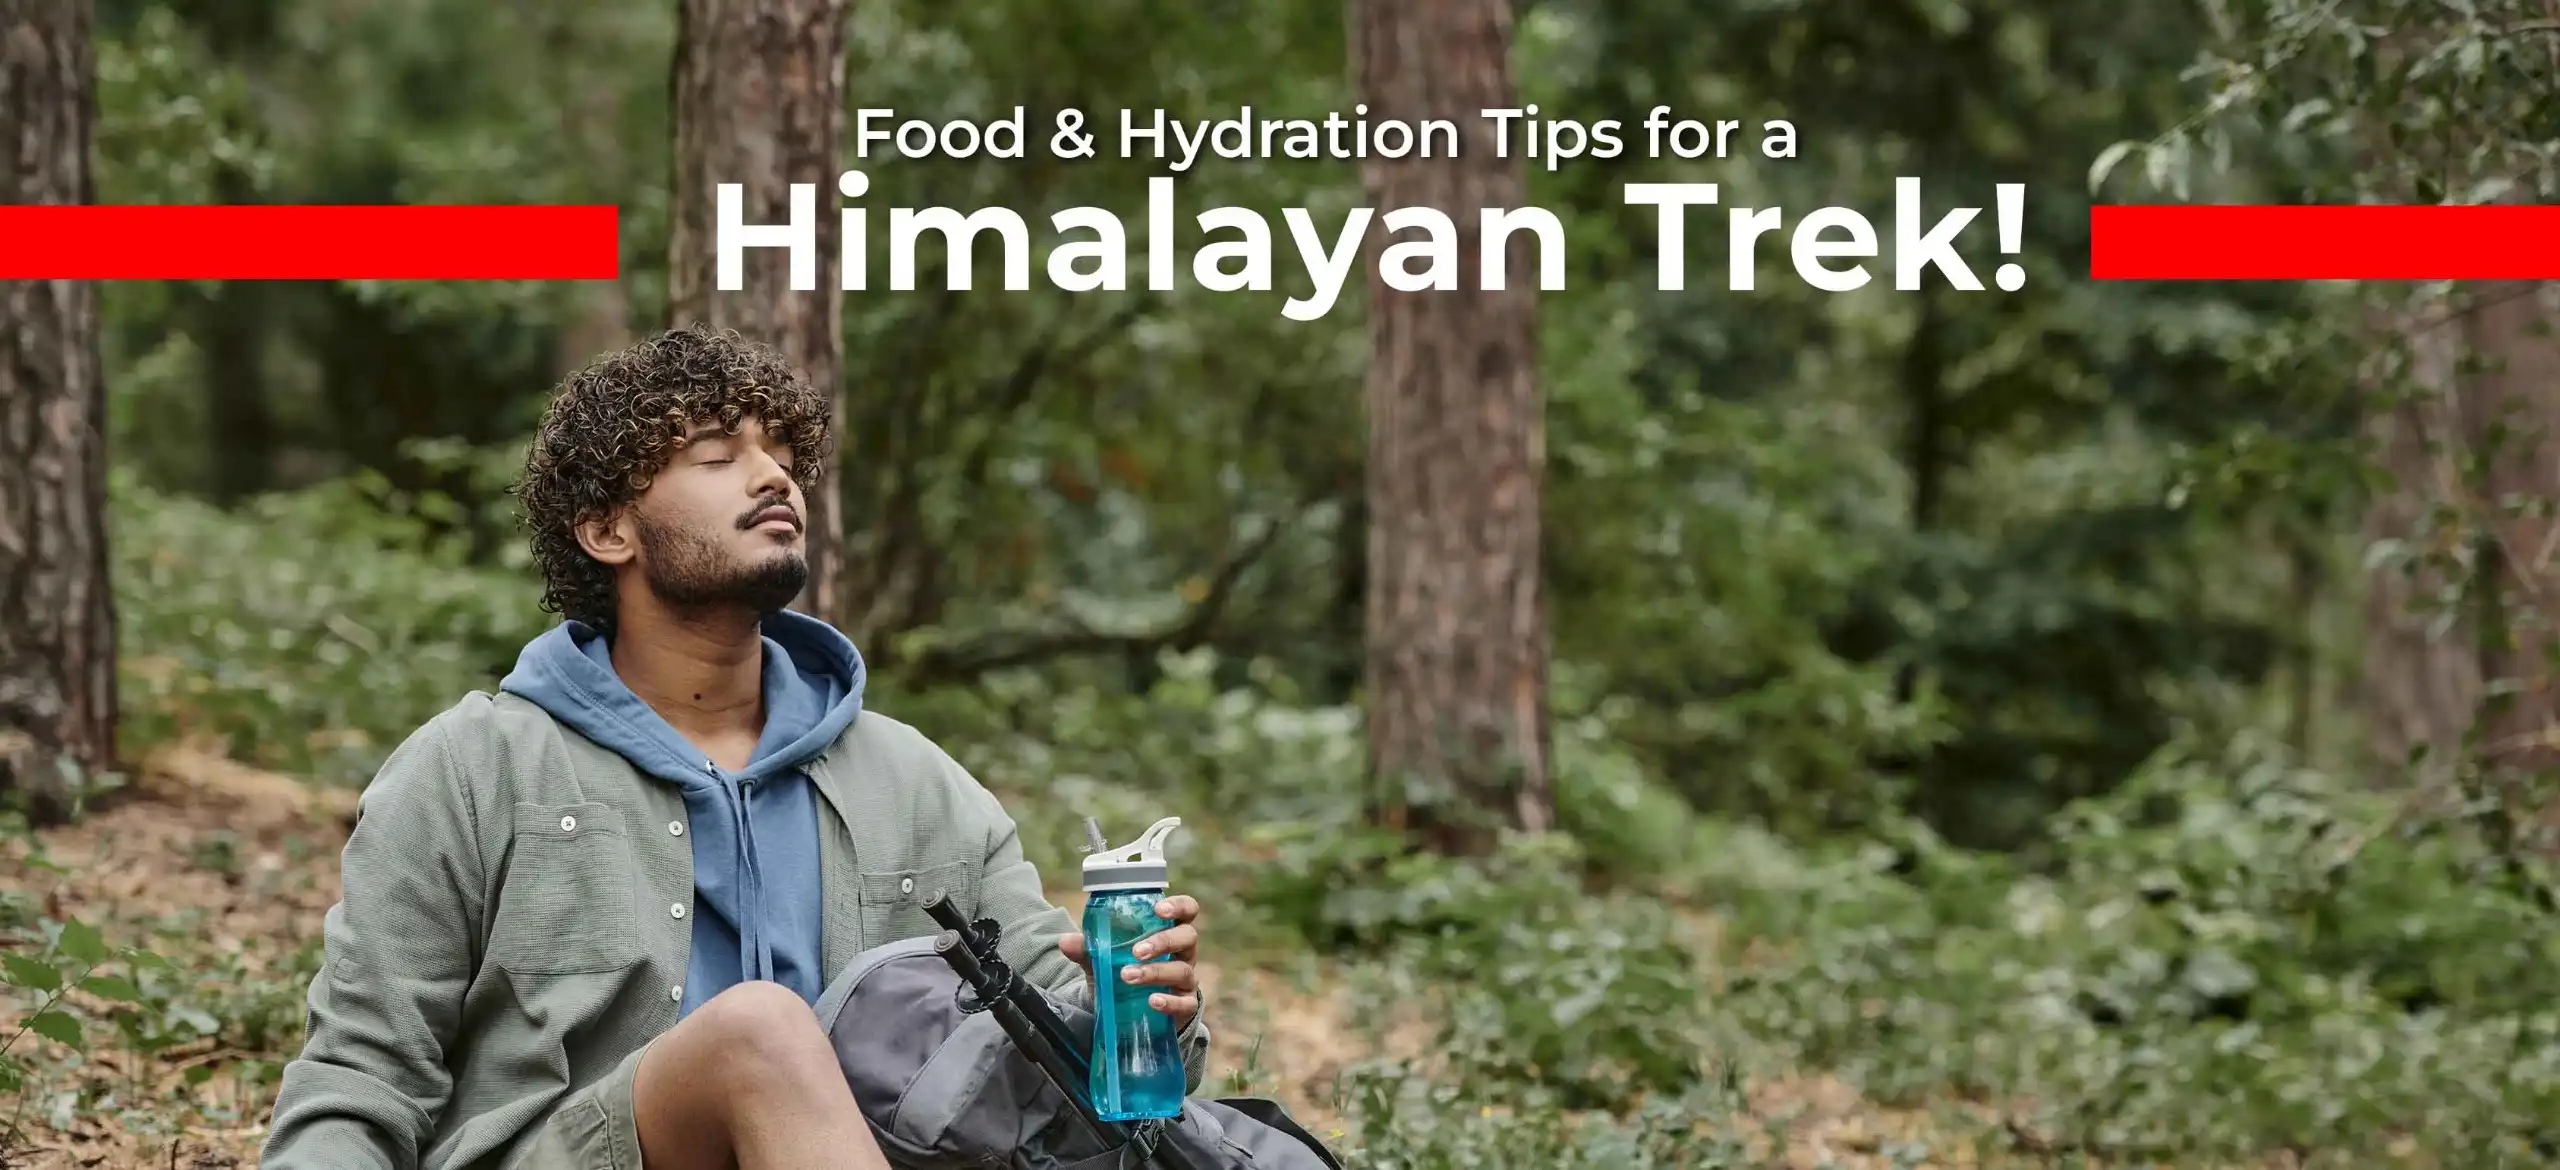 Food & Hydration Tips For A Himalayan Trek!